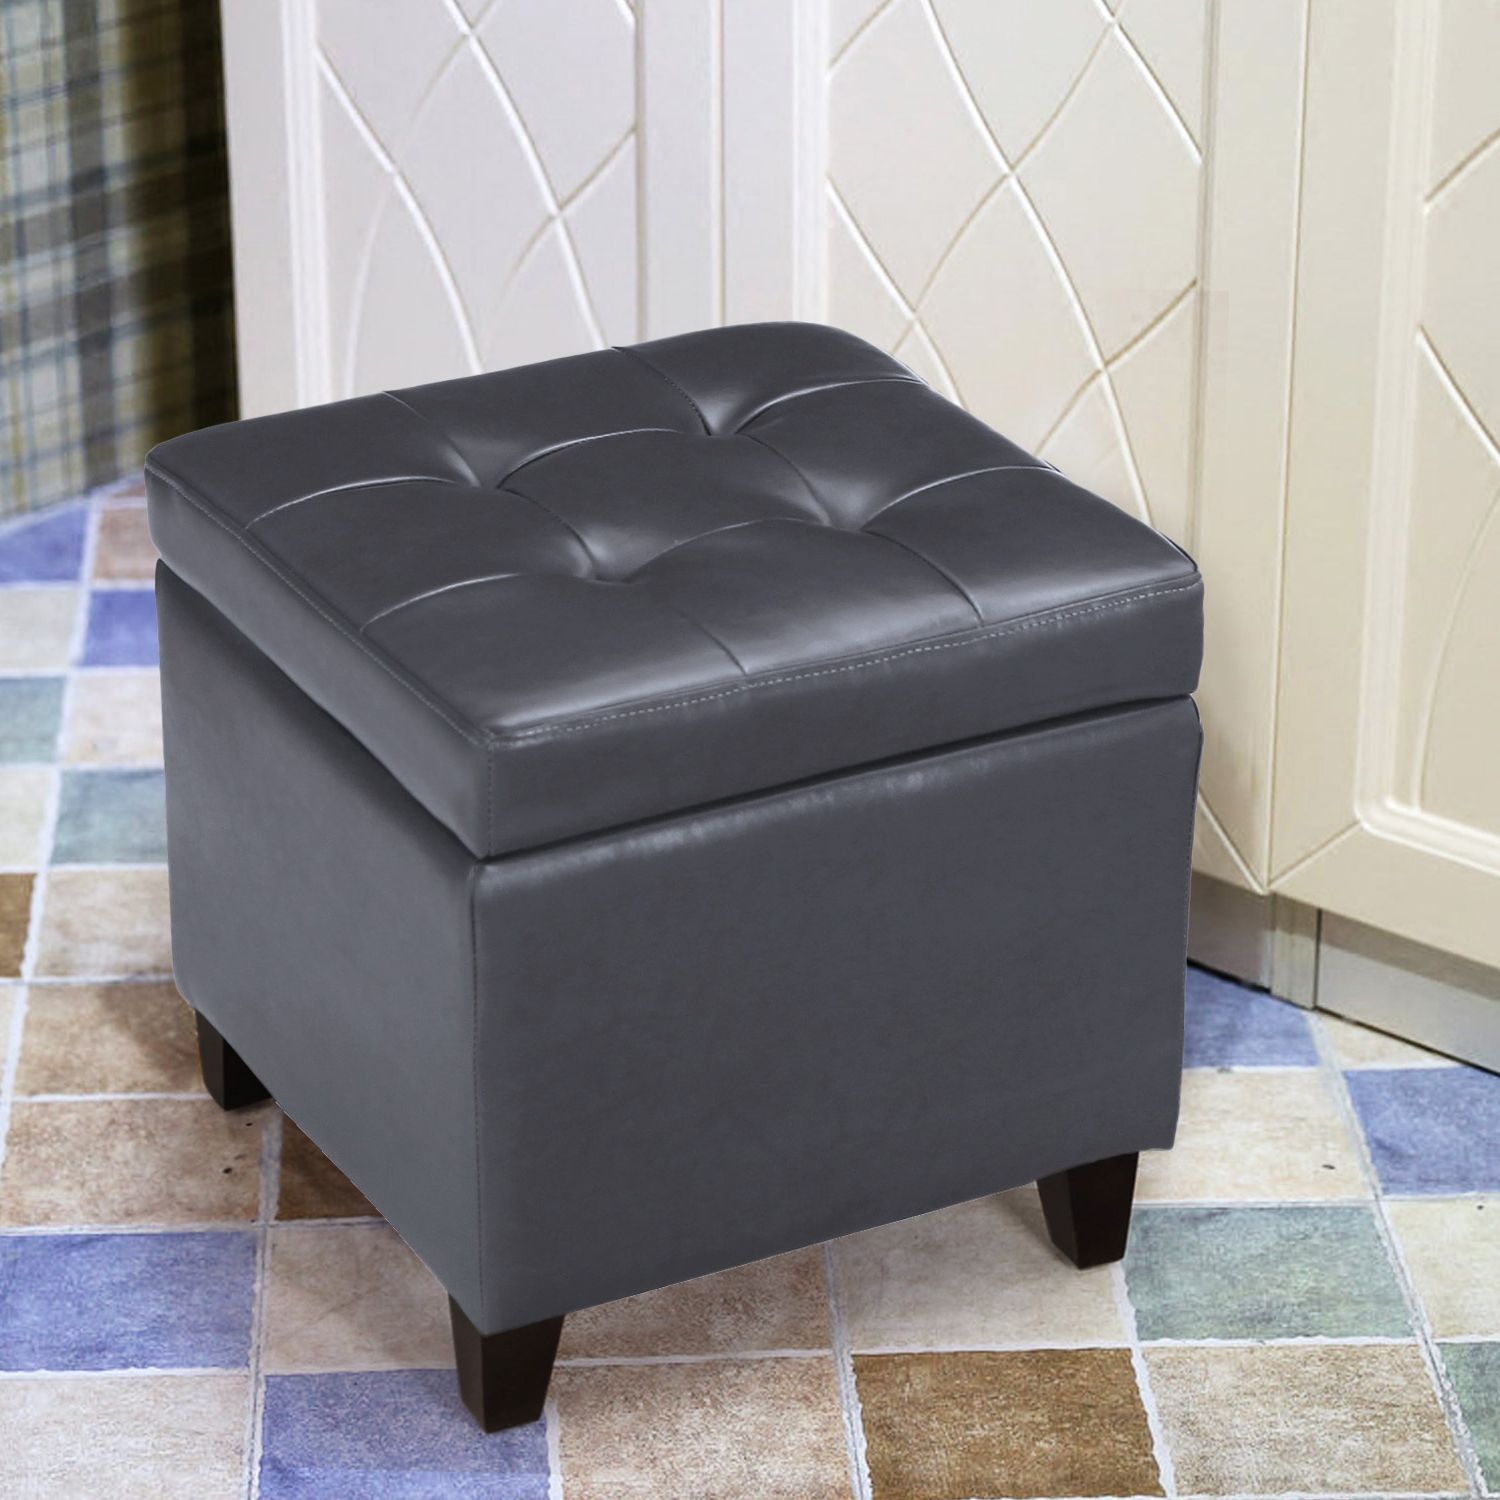 Joveco Leather Square Tufted Cubic Cube Storage Ottoman Footstool,dim In Most Recent Twill Square Cube Ottomans (View 1 of 10)